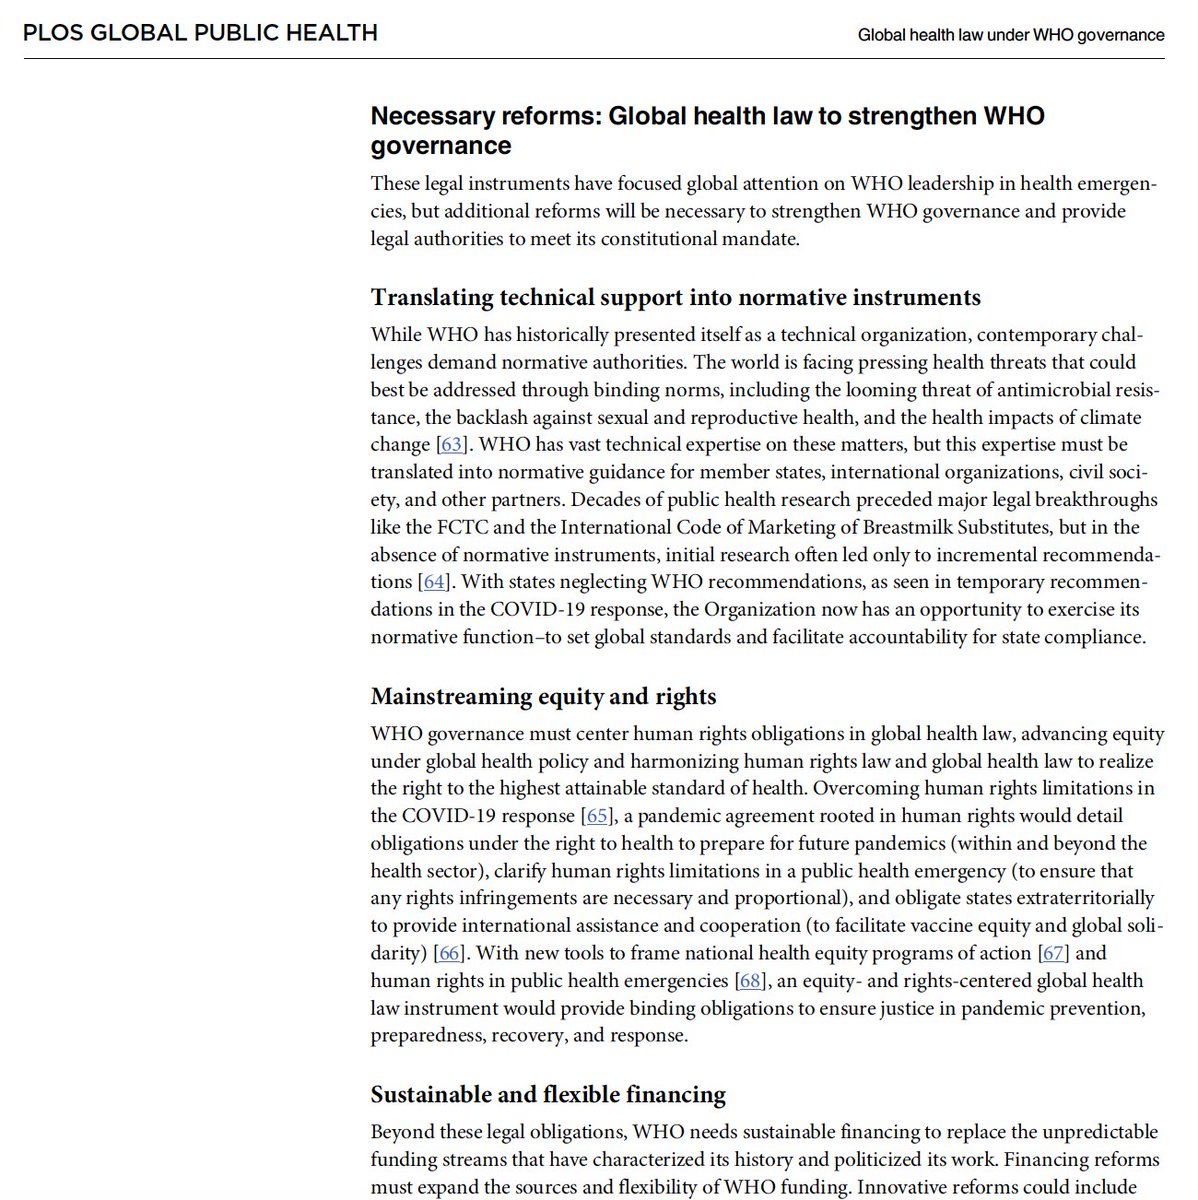 As @WHO Member States struggle to develop needed #Law reforms, the @GHLConsortium reviews the long evolution of #GlobalHealthLaw under WHO governance, examining challenges from: - new health actors, - shifting normative frameworks & - soft law diplomacy. journals.plos.org/globalpubliche…